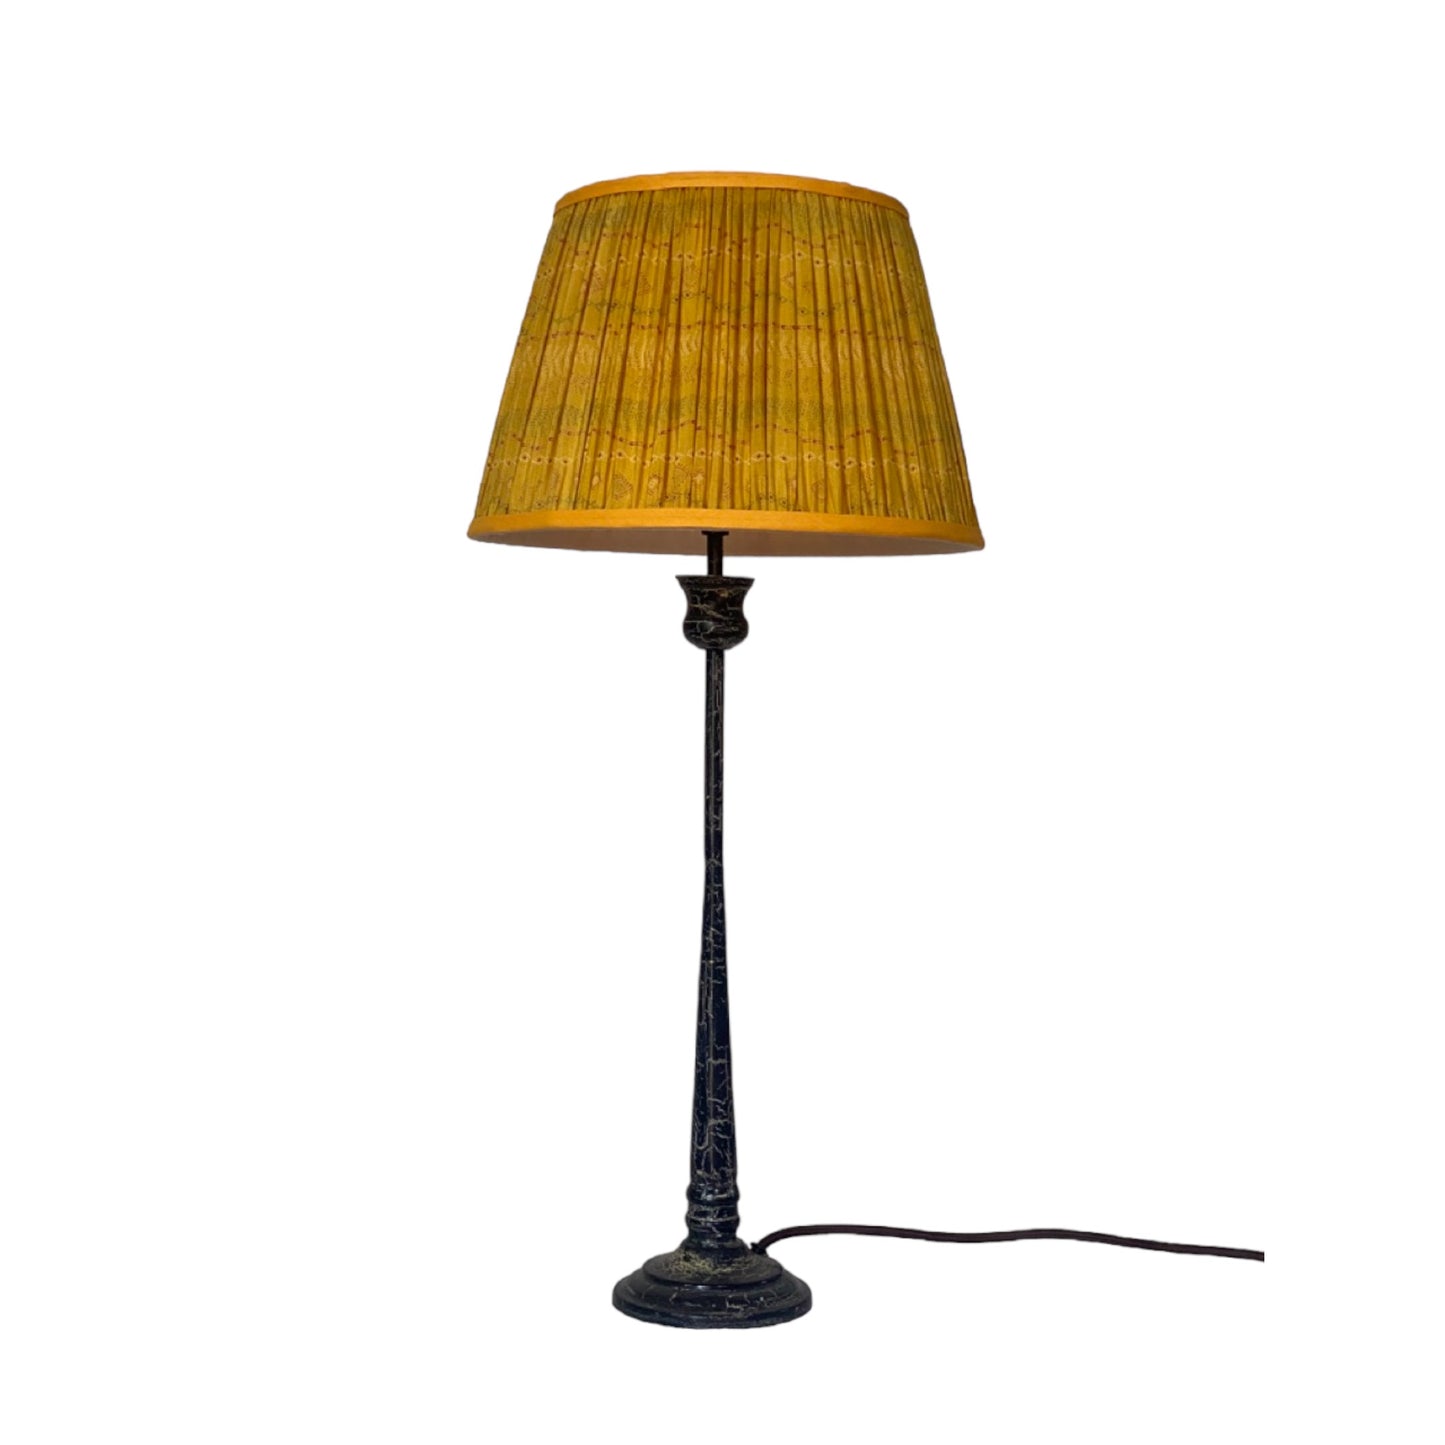 Patala lamp with 30cm yellow wave shade